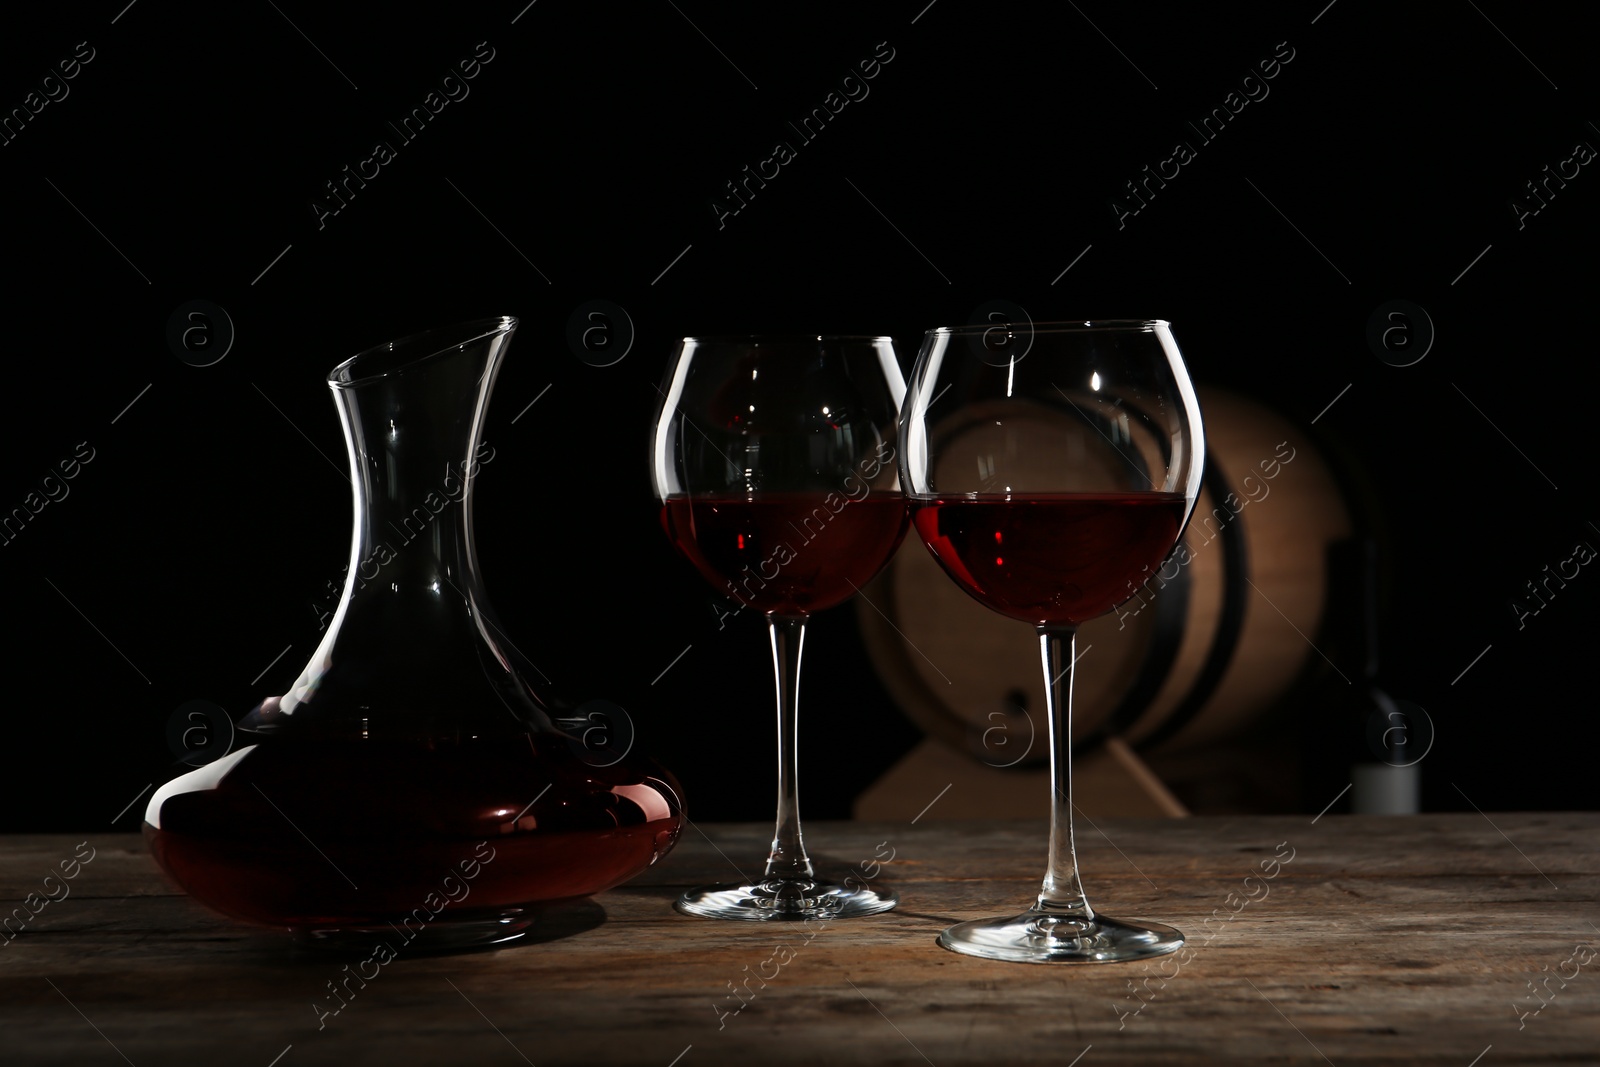 Photo of Elegant decanter and glasses with red wine on table against dark background